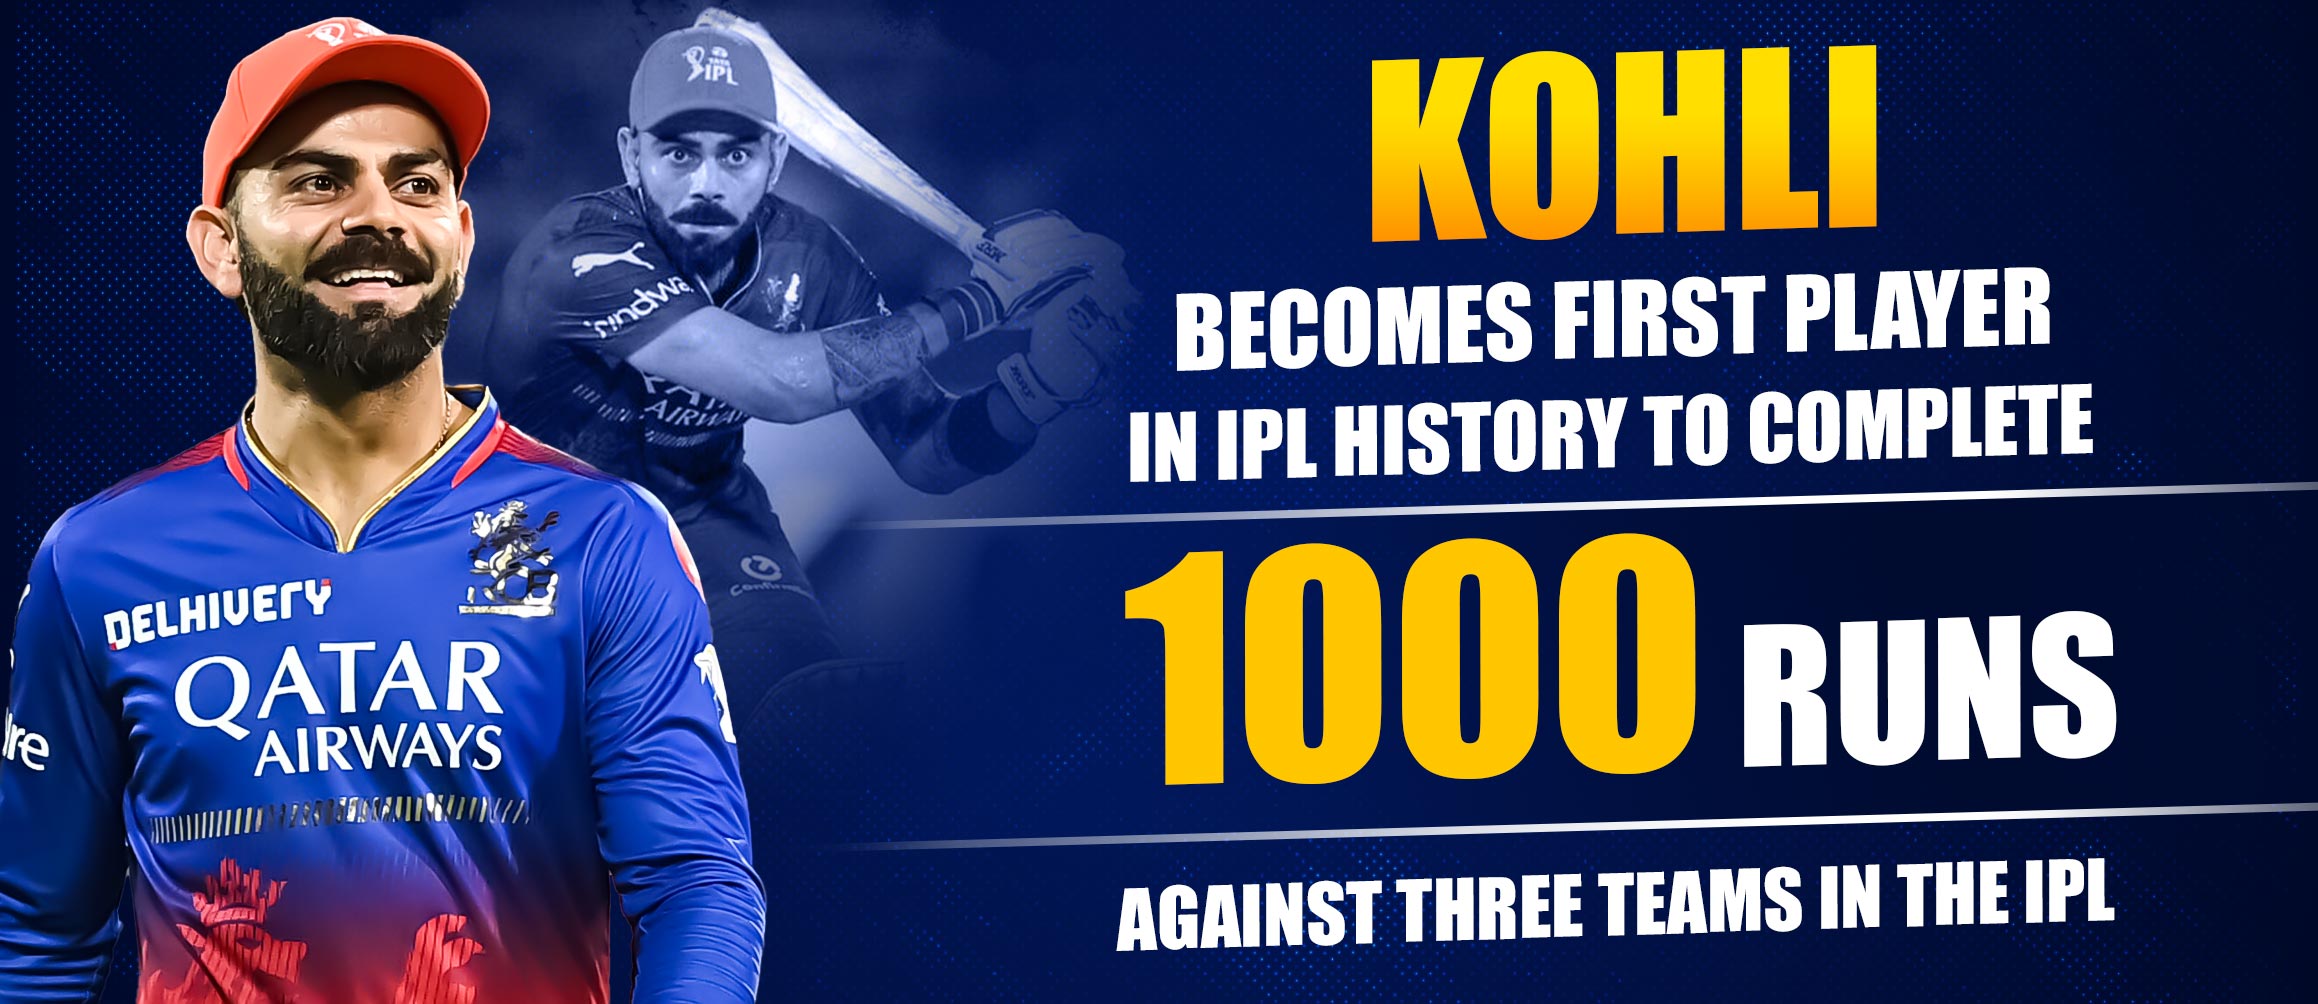 Kohli Becomes First Player in IPL History to Complete 1000 Runs Against 3 Teams!